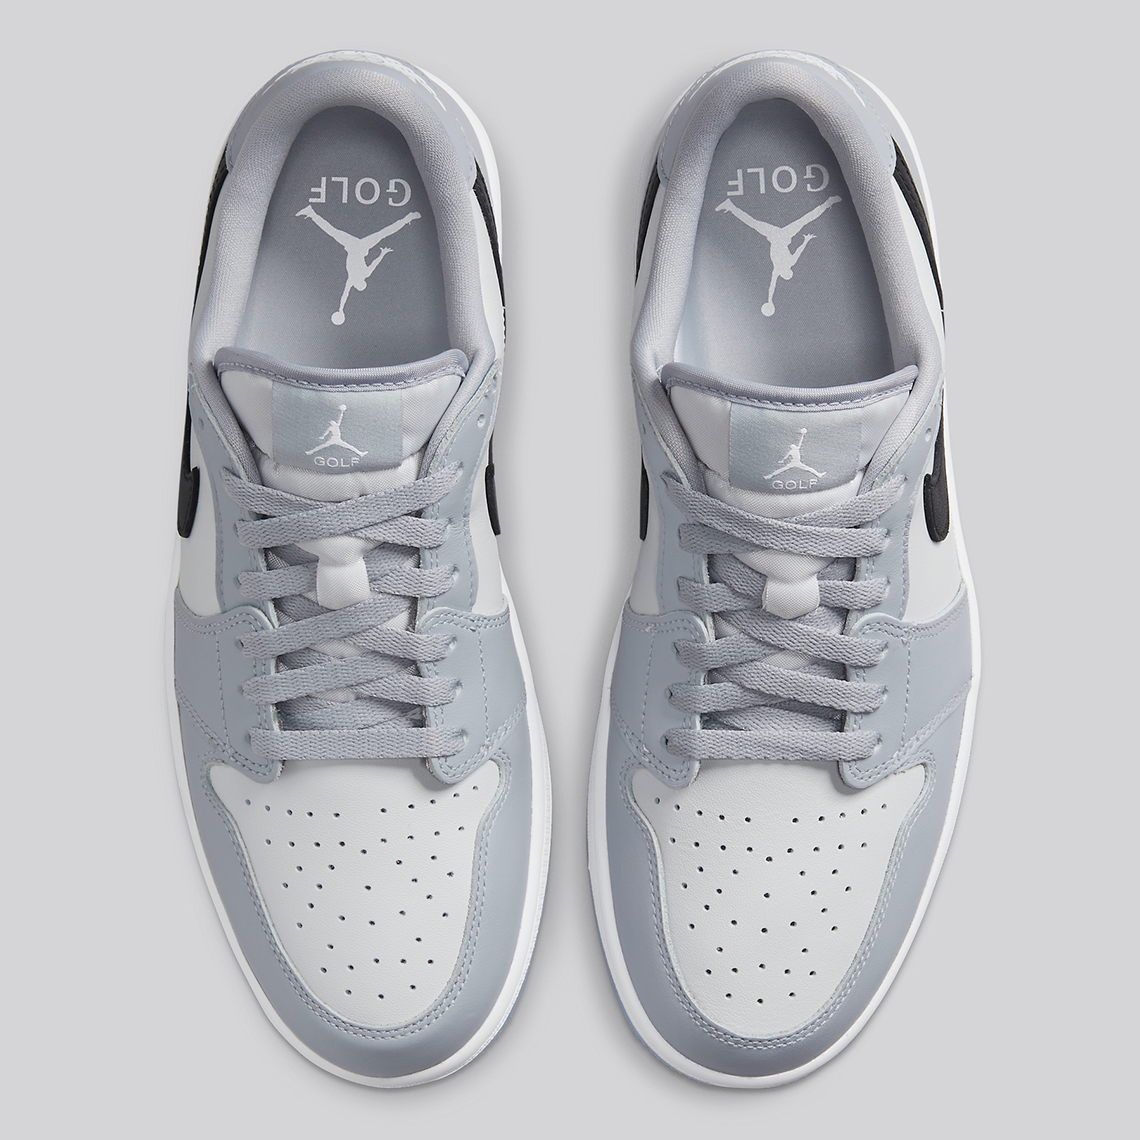 The Air jordan High 1 Elevate Low "Atmosphere" is a brand new women's Golf Wolf Grey Dd9315 002 3